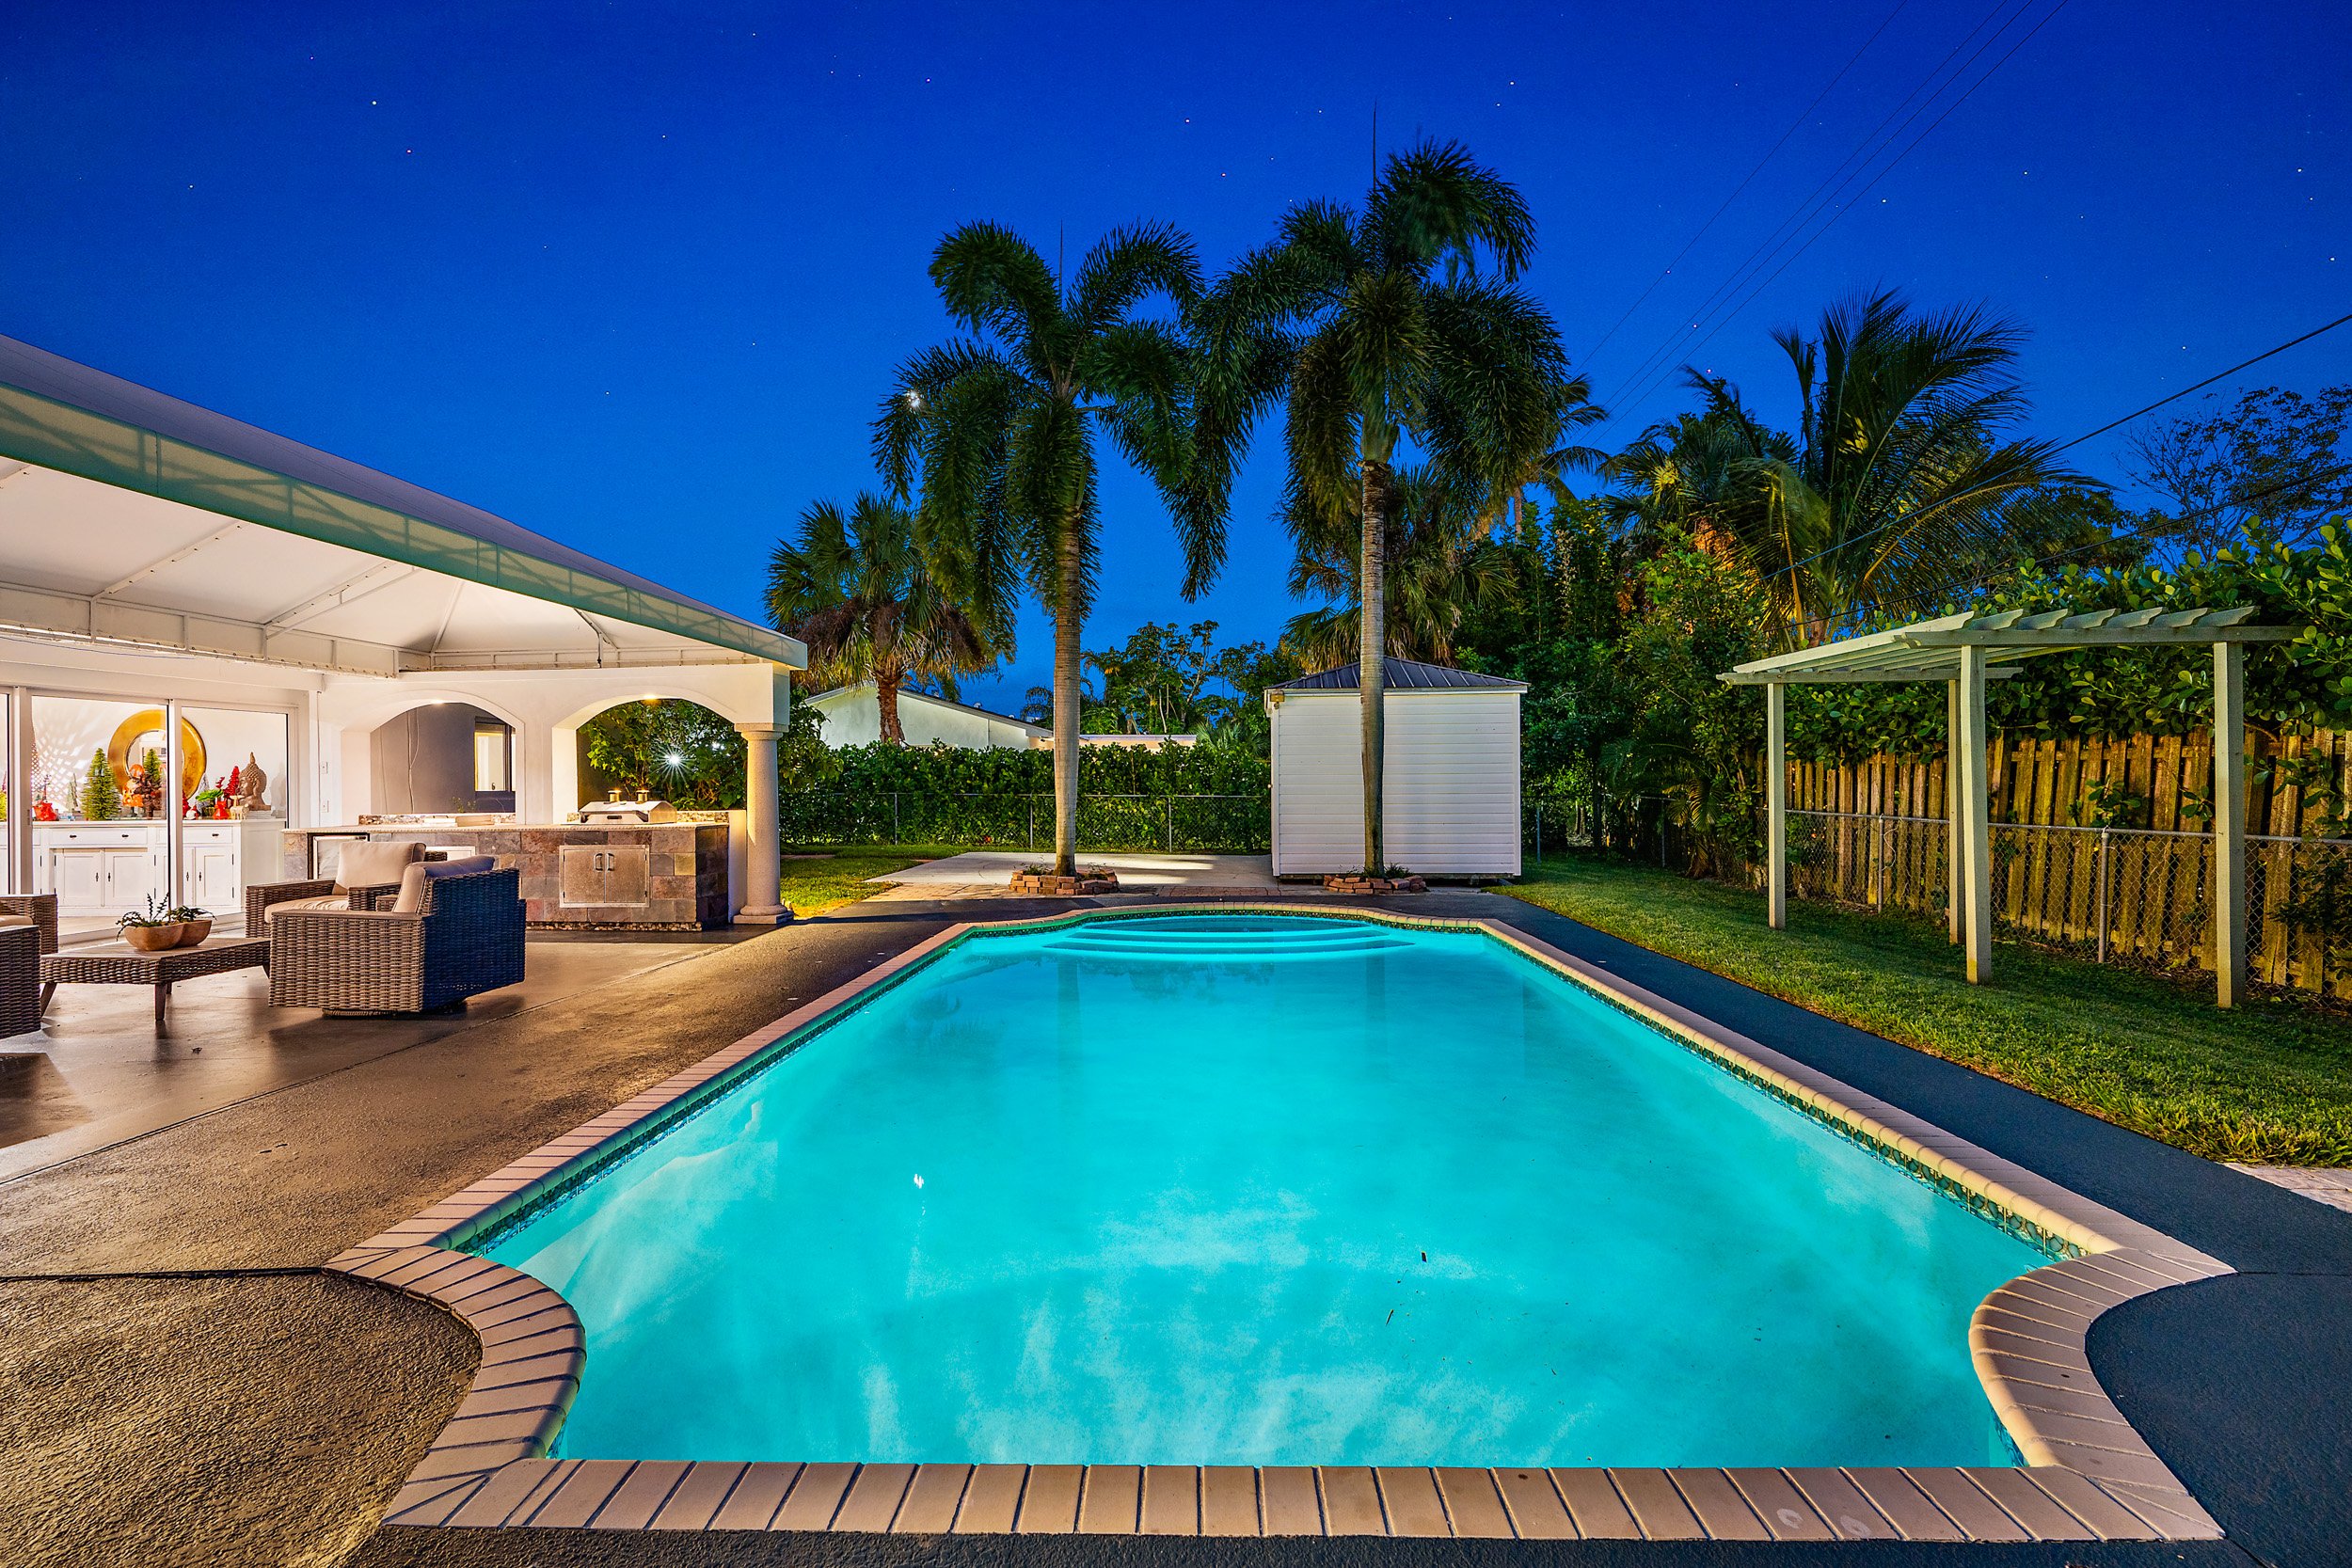 home with a pool in jupiter florida